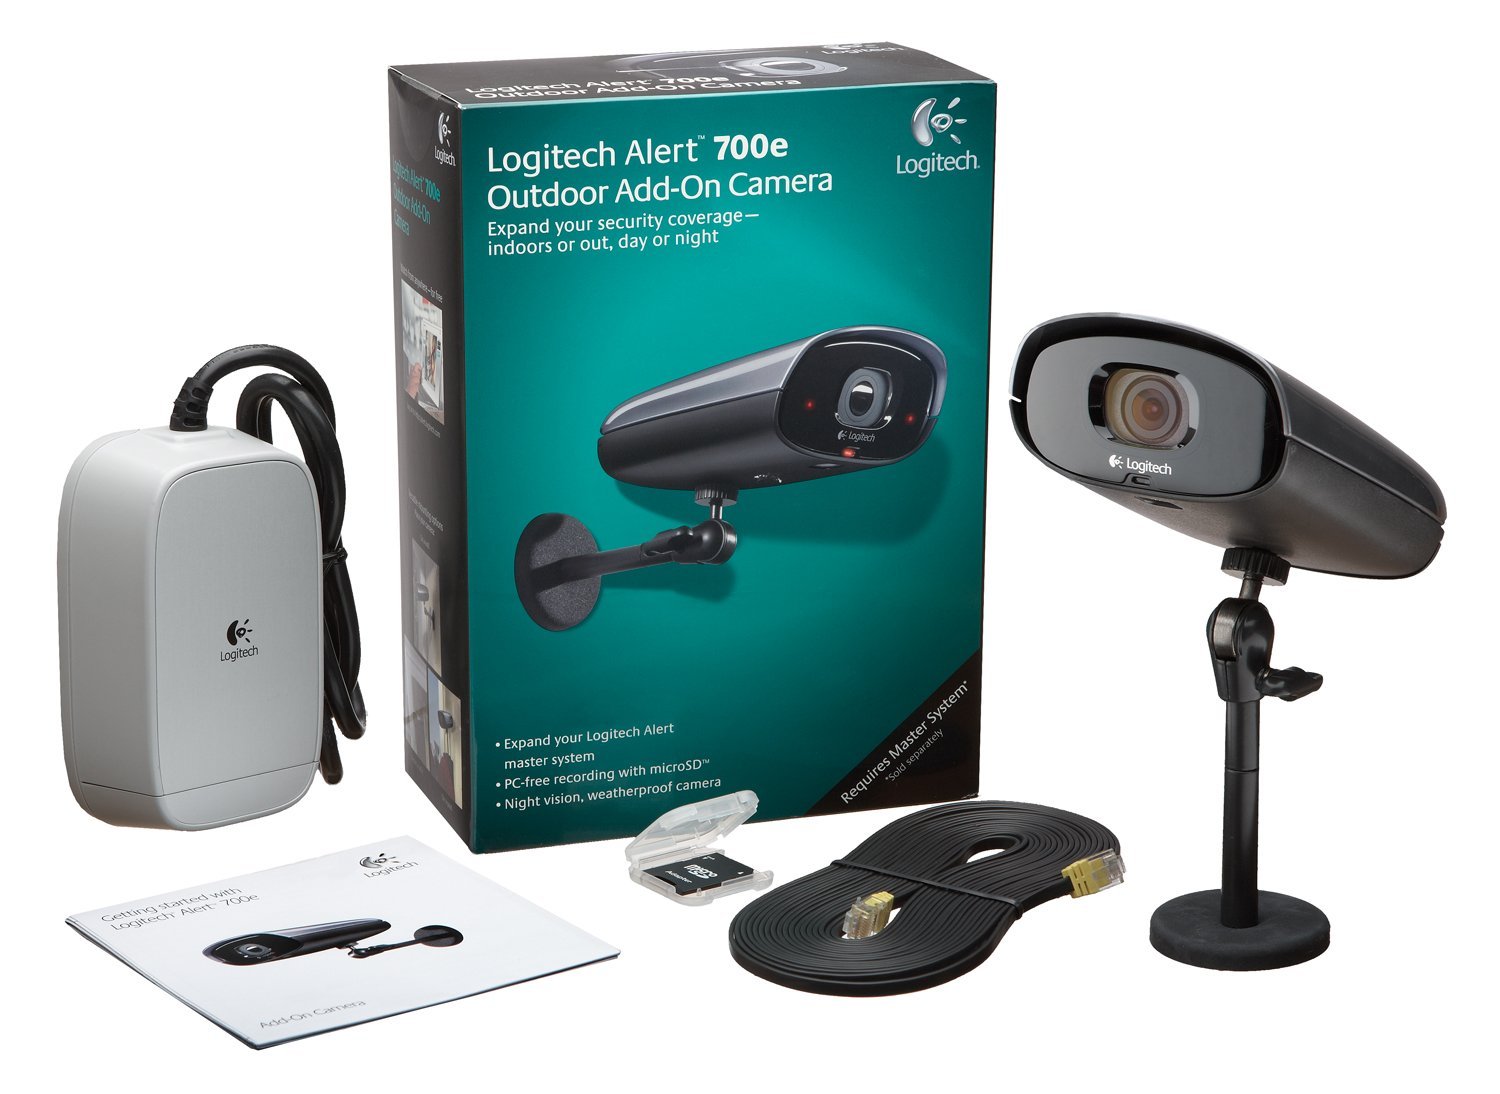 Review of Logitech Alert 700e Outdoor Add-On HD Quality Security Camera with Night Vision (961-000338)